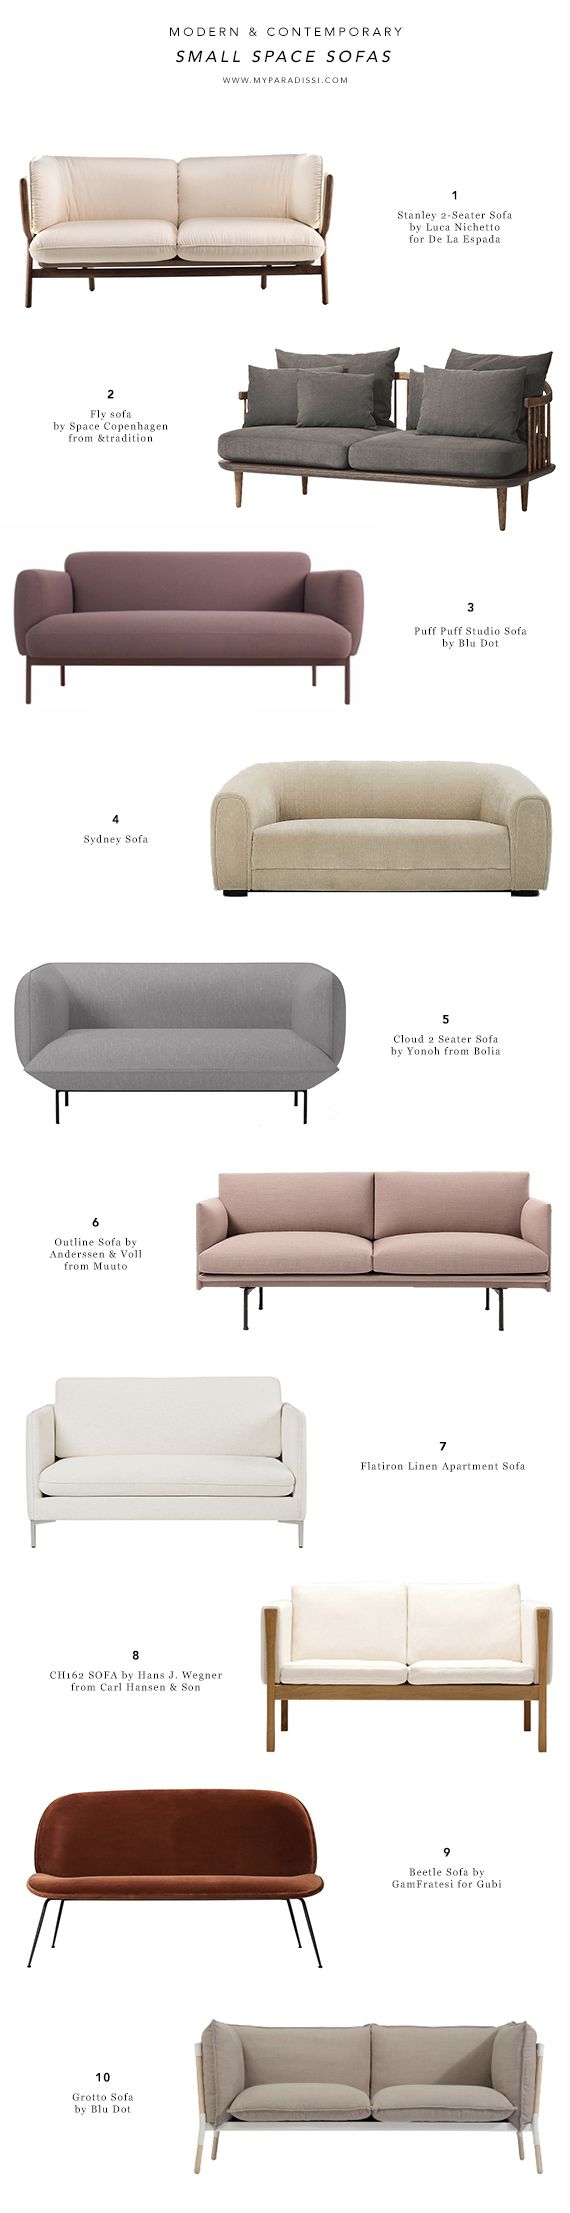 10 BEST: Contemporary small space sofas